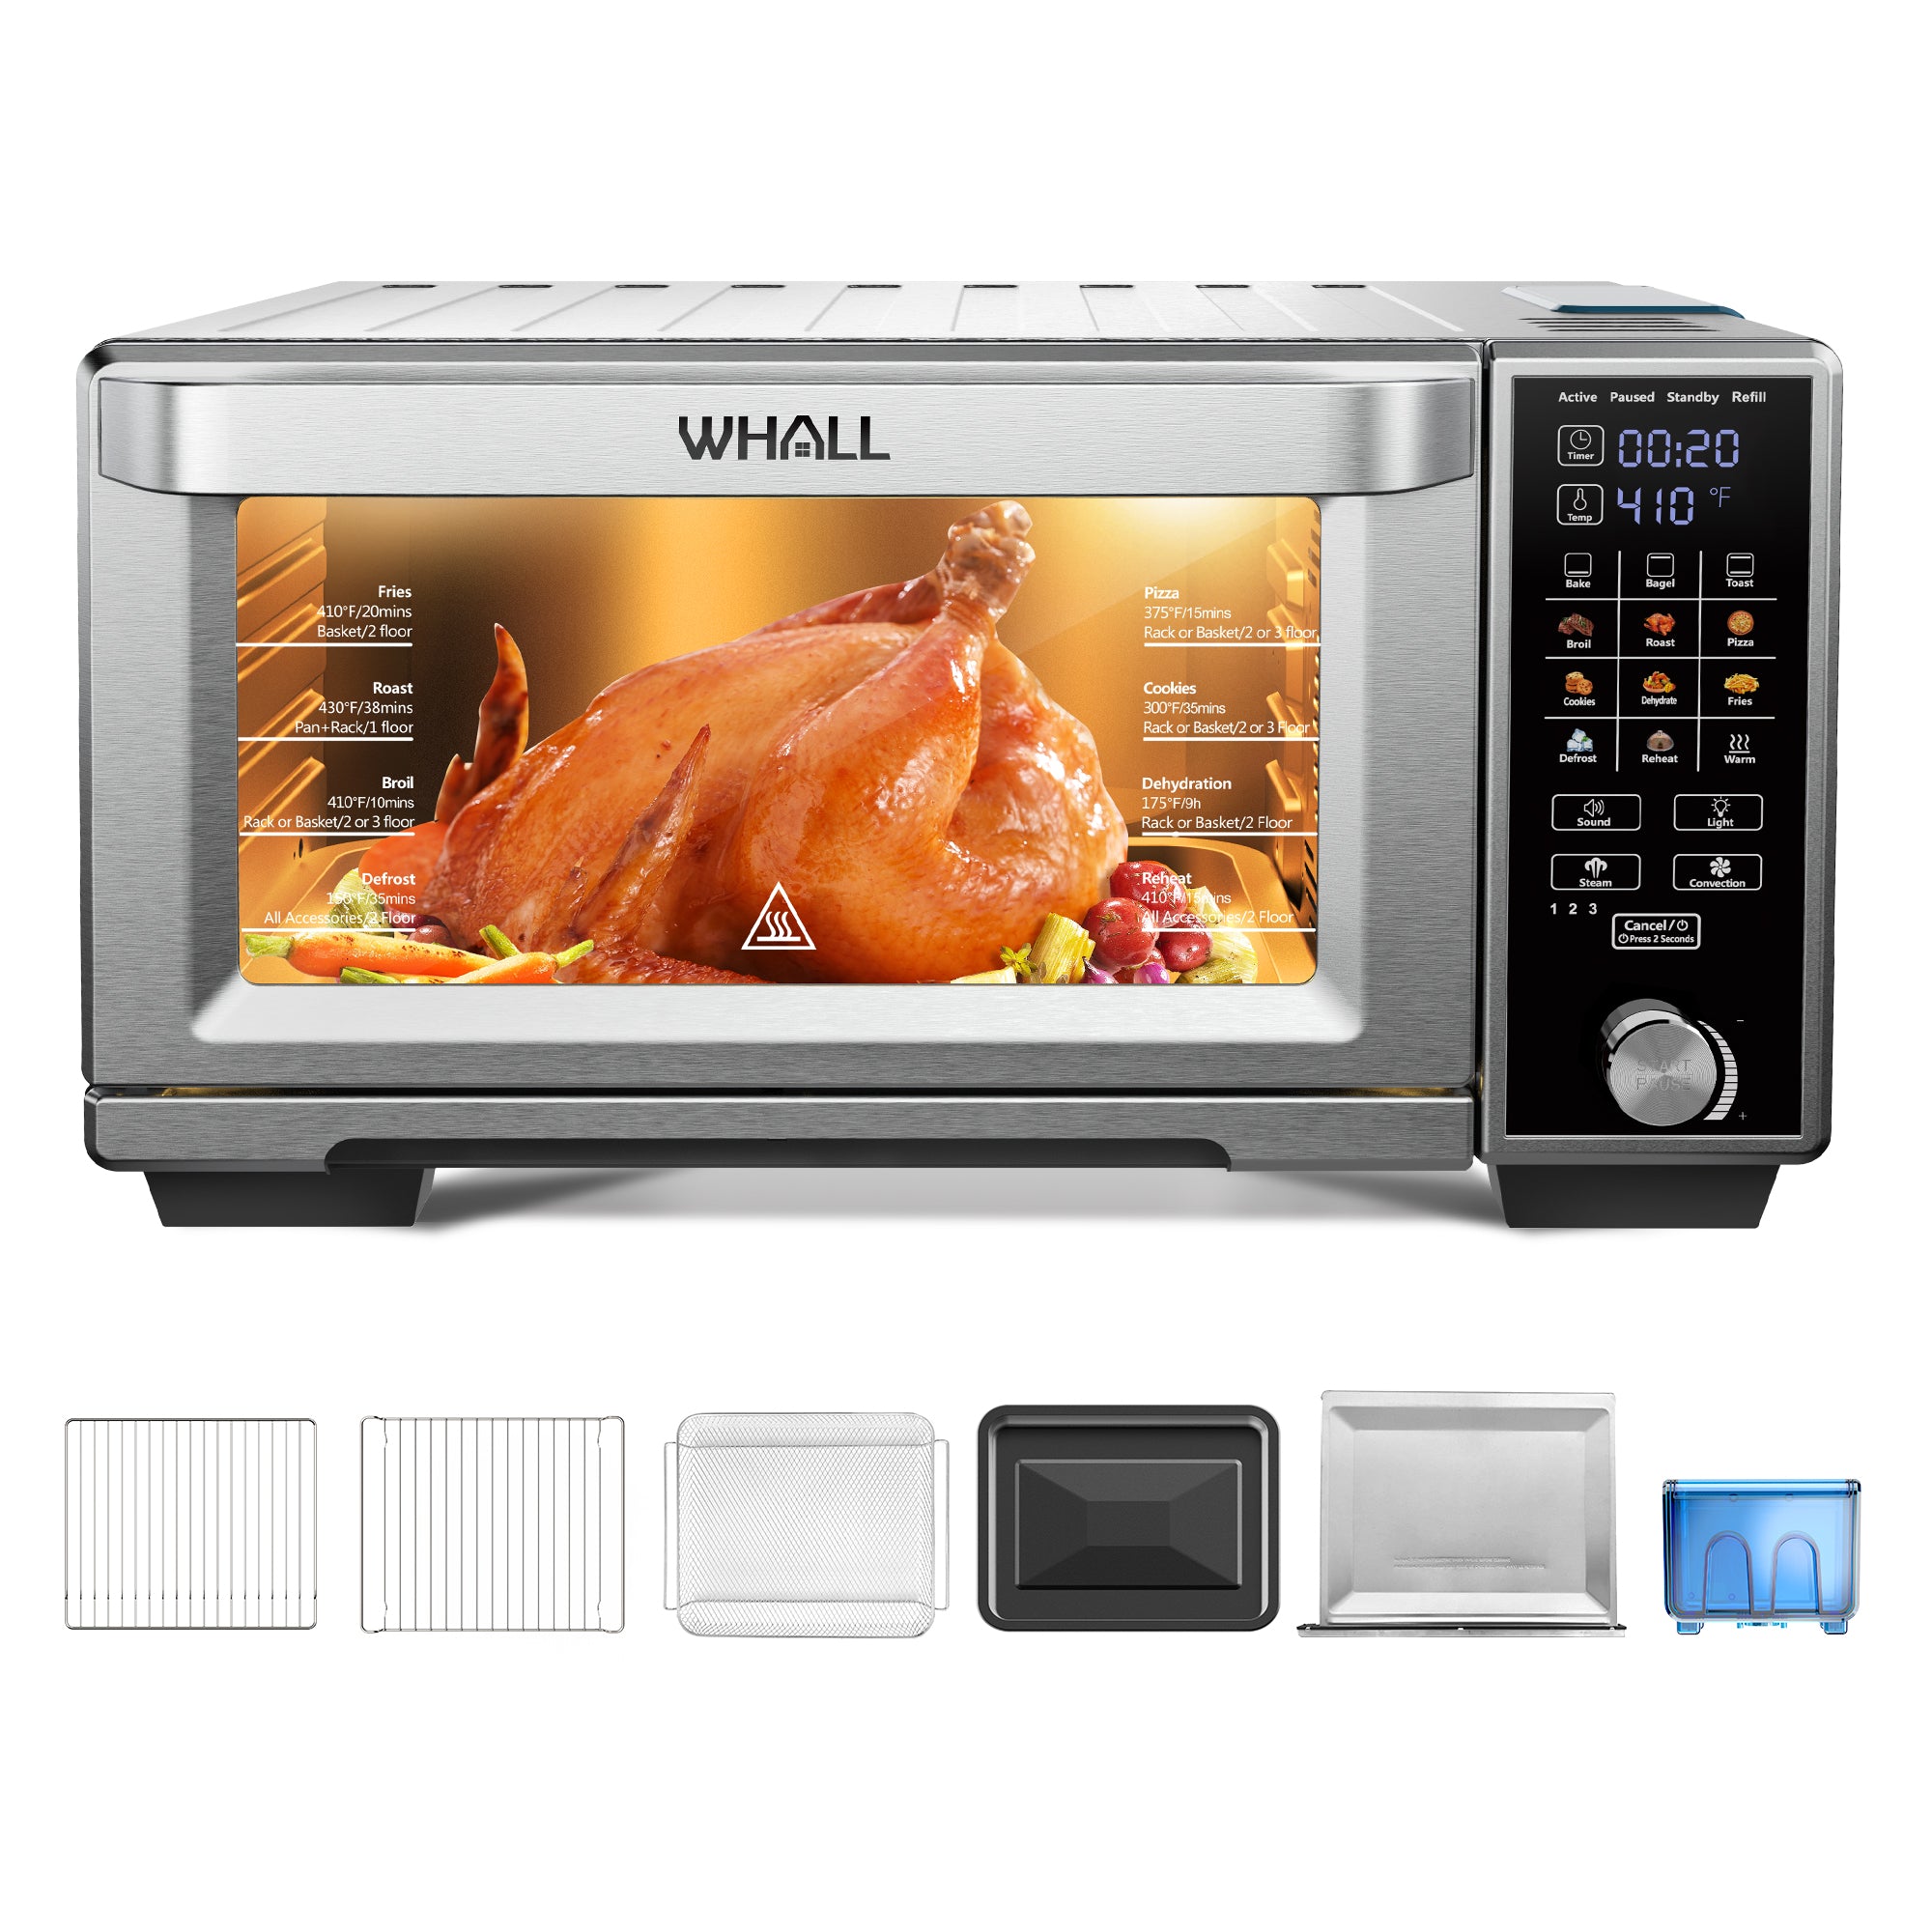 WHALL® AO28S01 Air Fryer Oven, Max XL Large 30-Quart Smart Convection Oven,11-in-1 Toaster Oven with Steam Function,12-inch Pizza,6 slices of Toast, 4 Accessories Included, Stainless Steel /1700W/BLACK